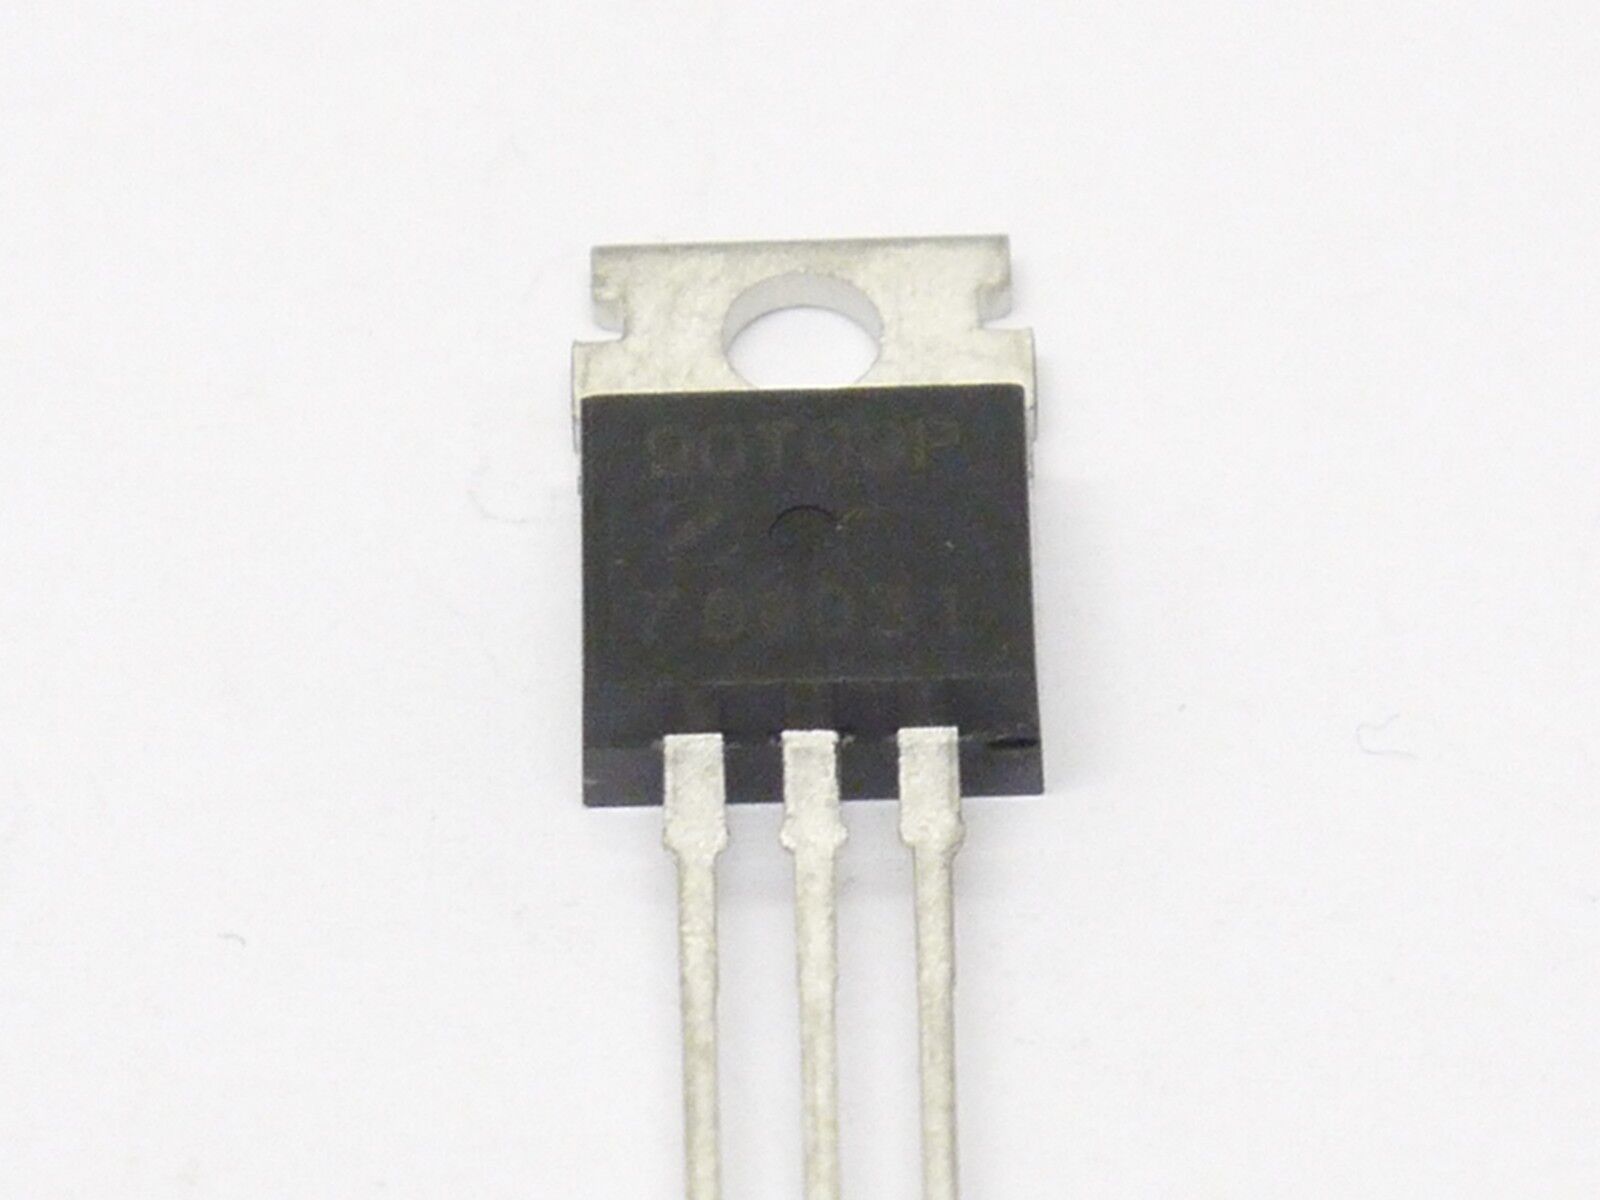 Hitachi 90t03p Mosfet 3pin Ic Chip Chipset